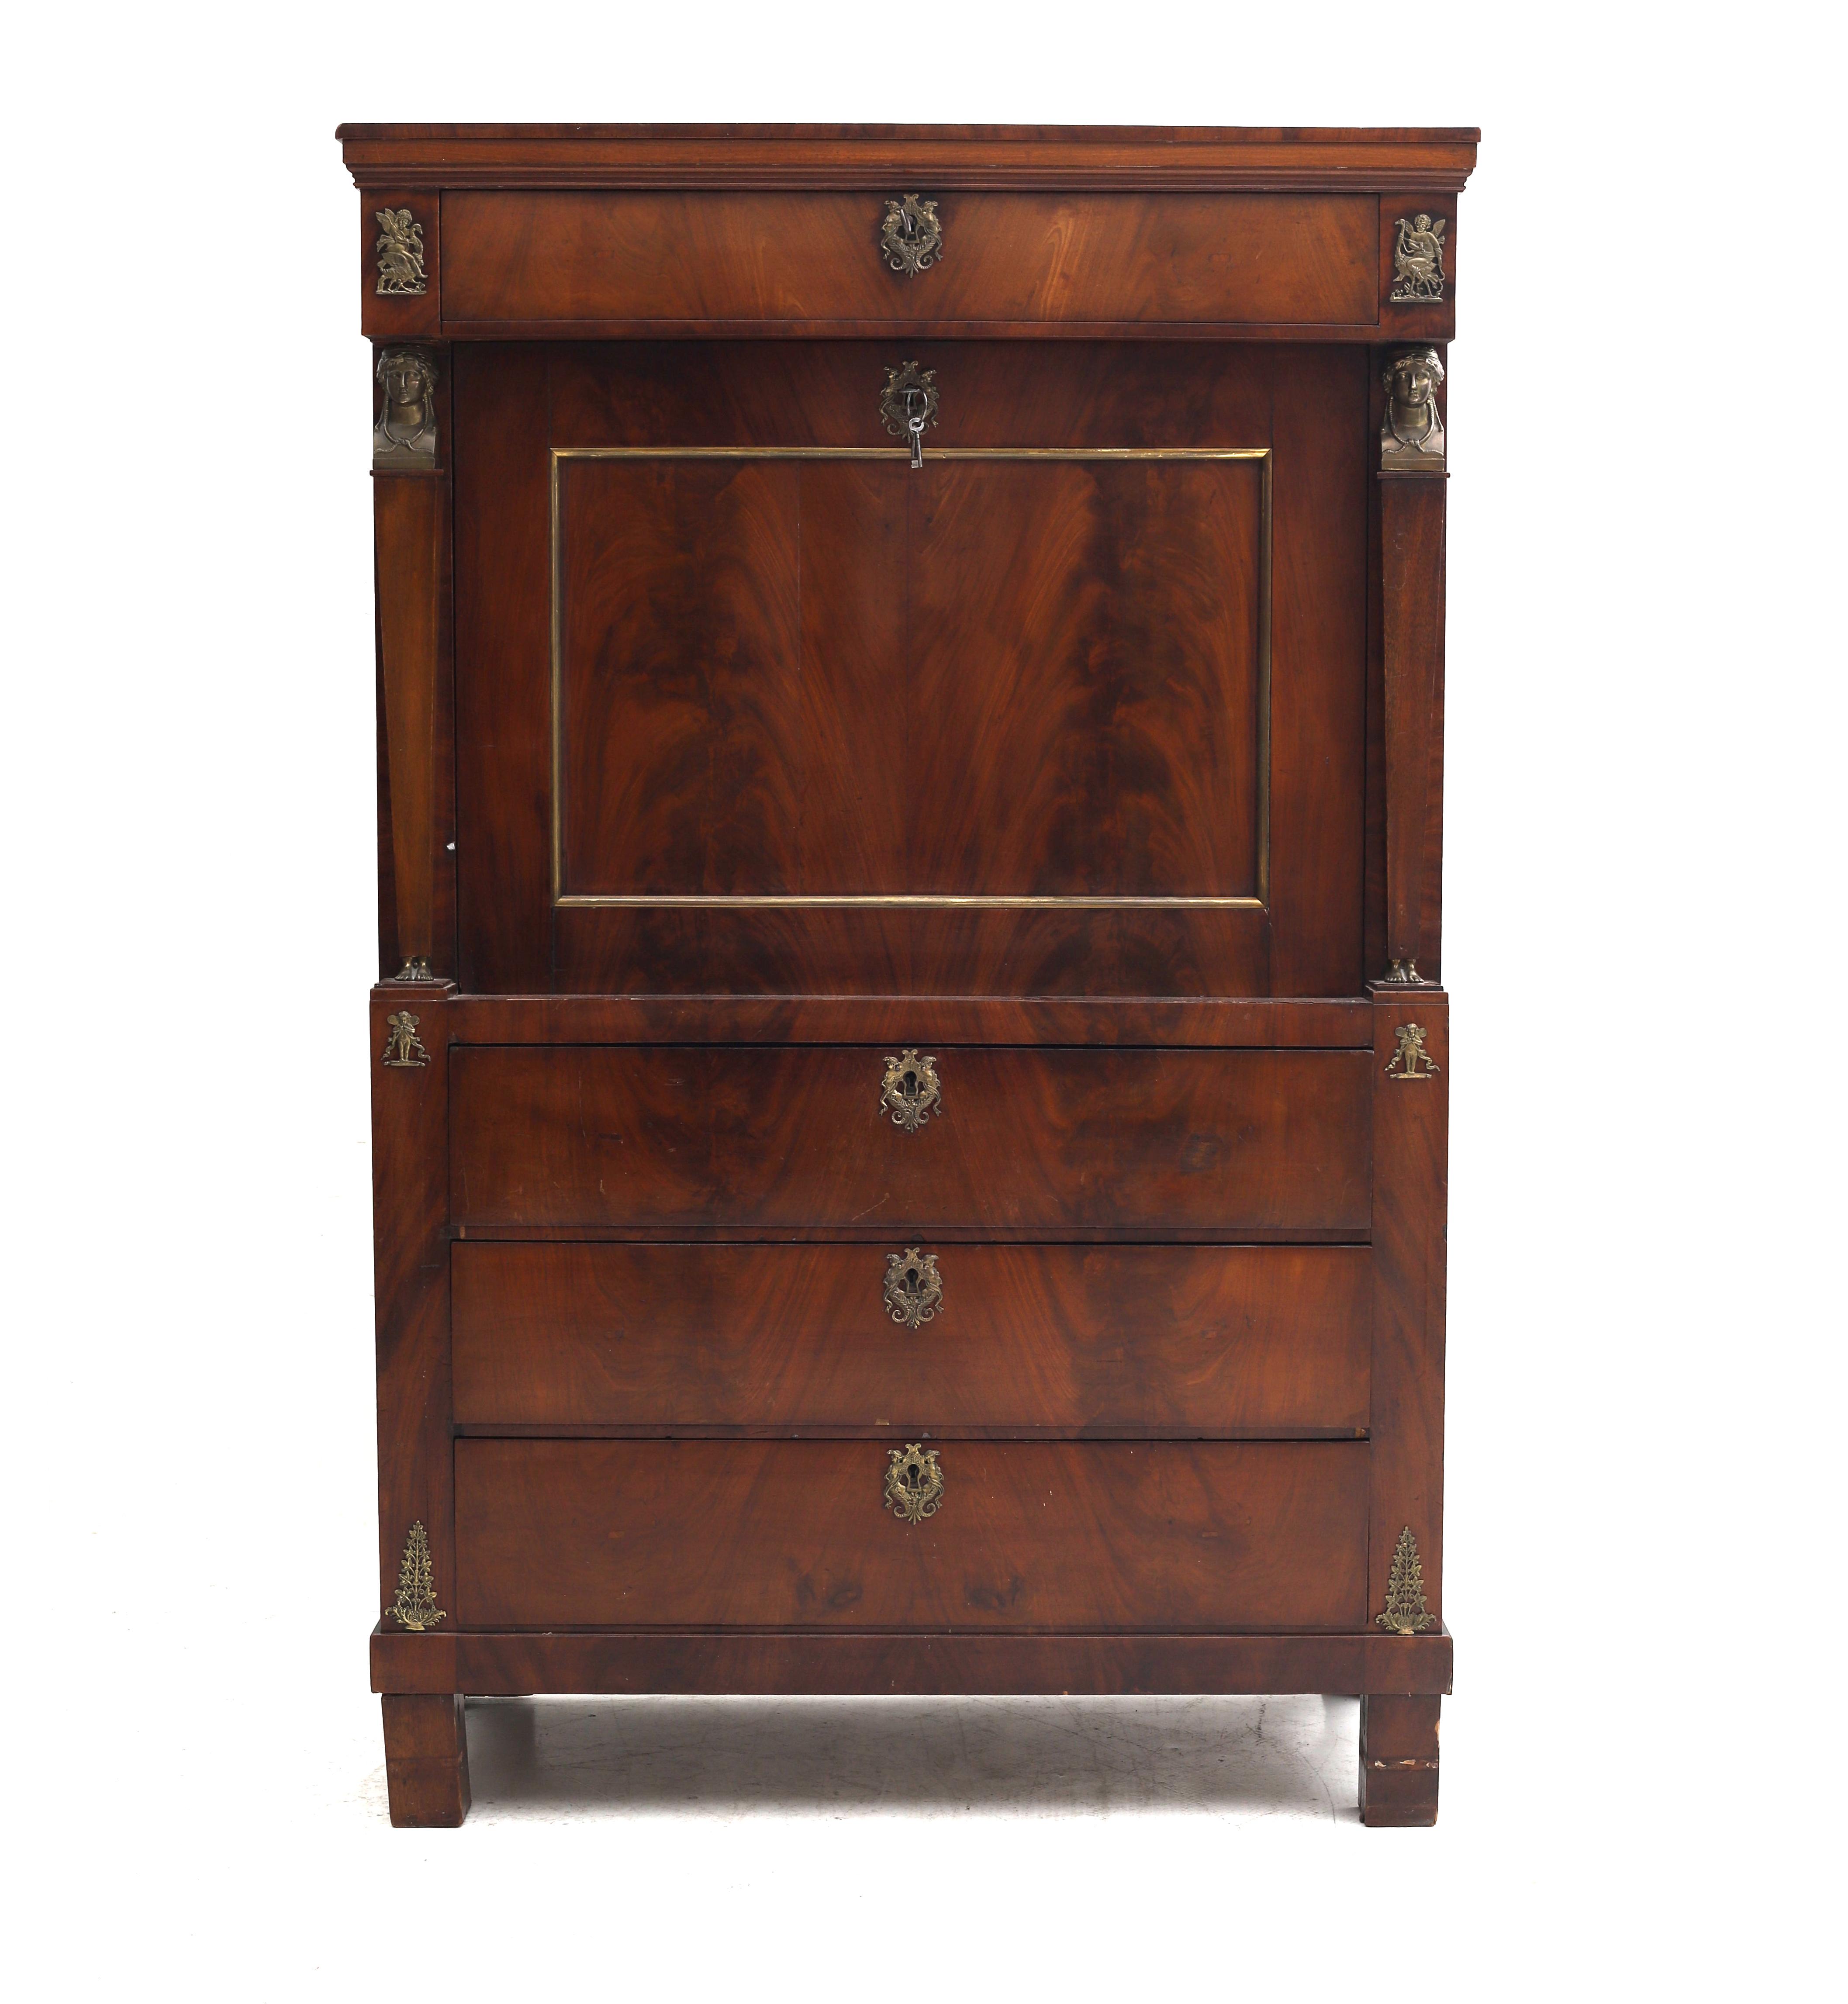 Mahogany veneered, with a wide drawer above a hinged top, behind which various compartments,